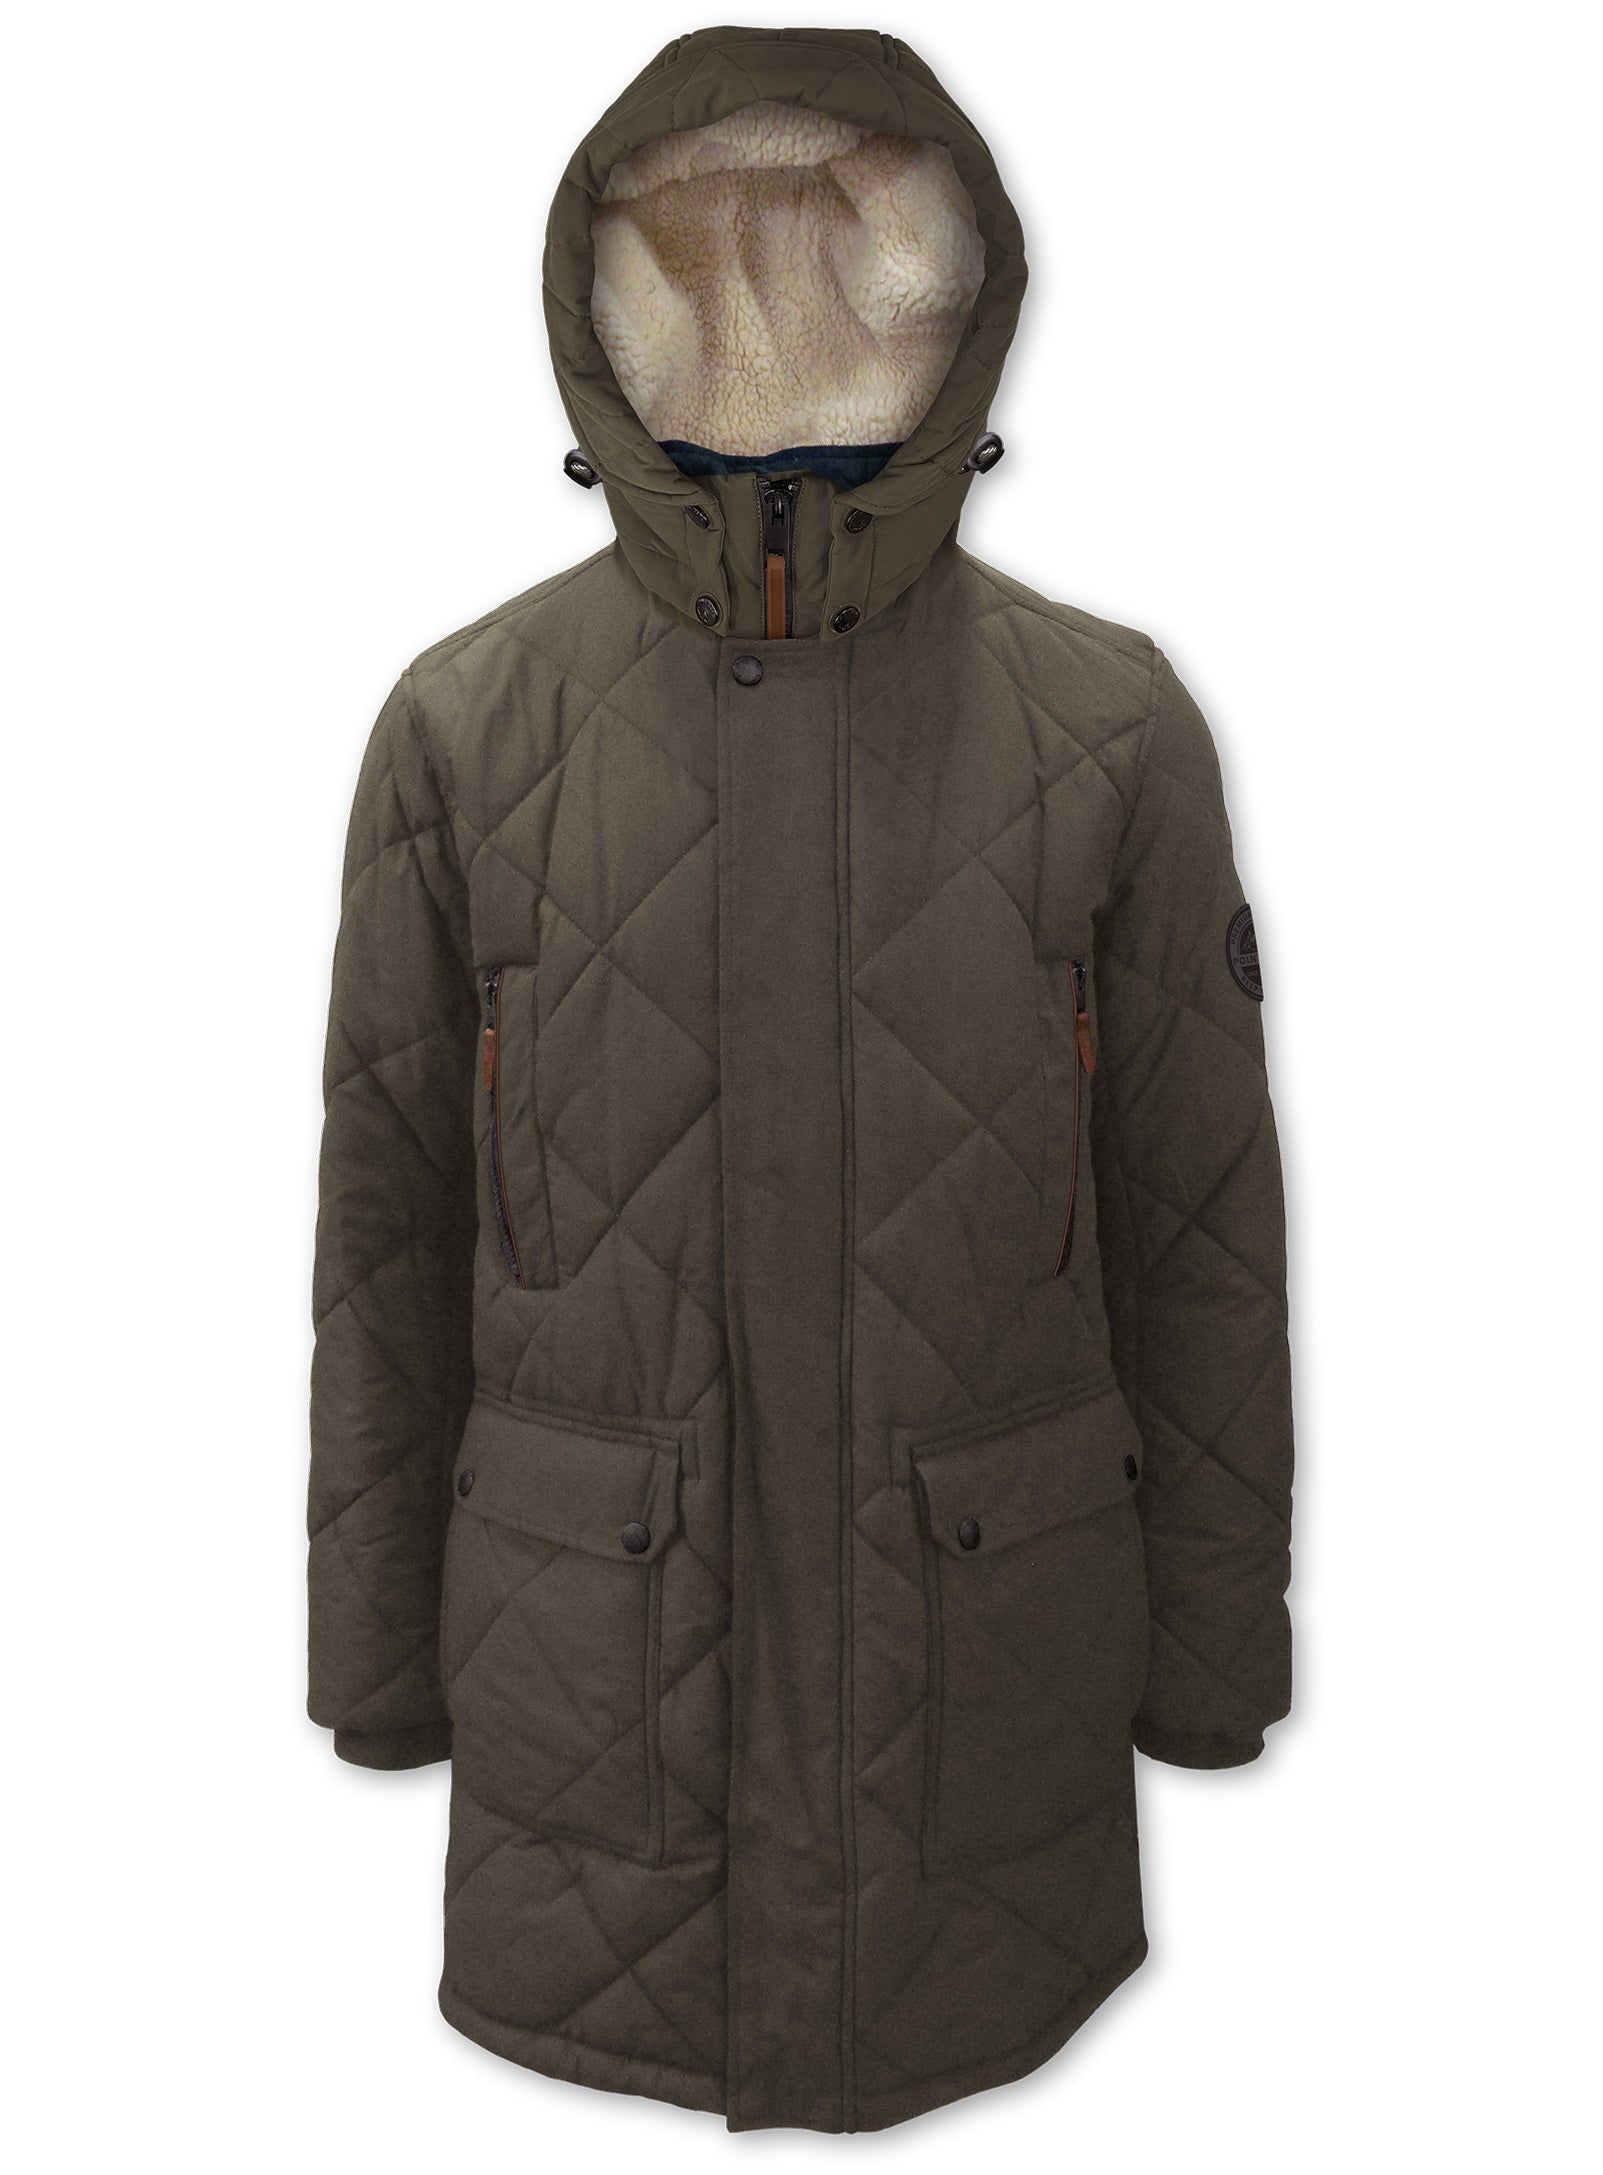 WILLIAM |Quilted Long Parka